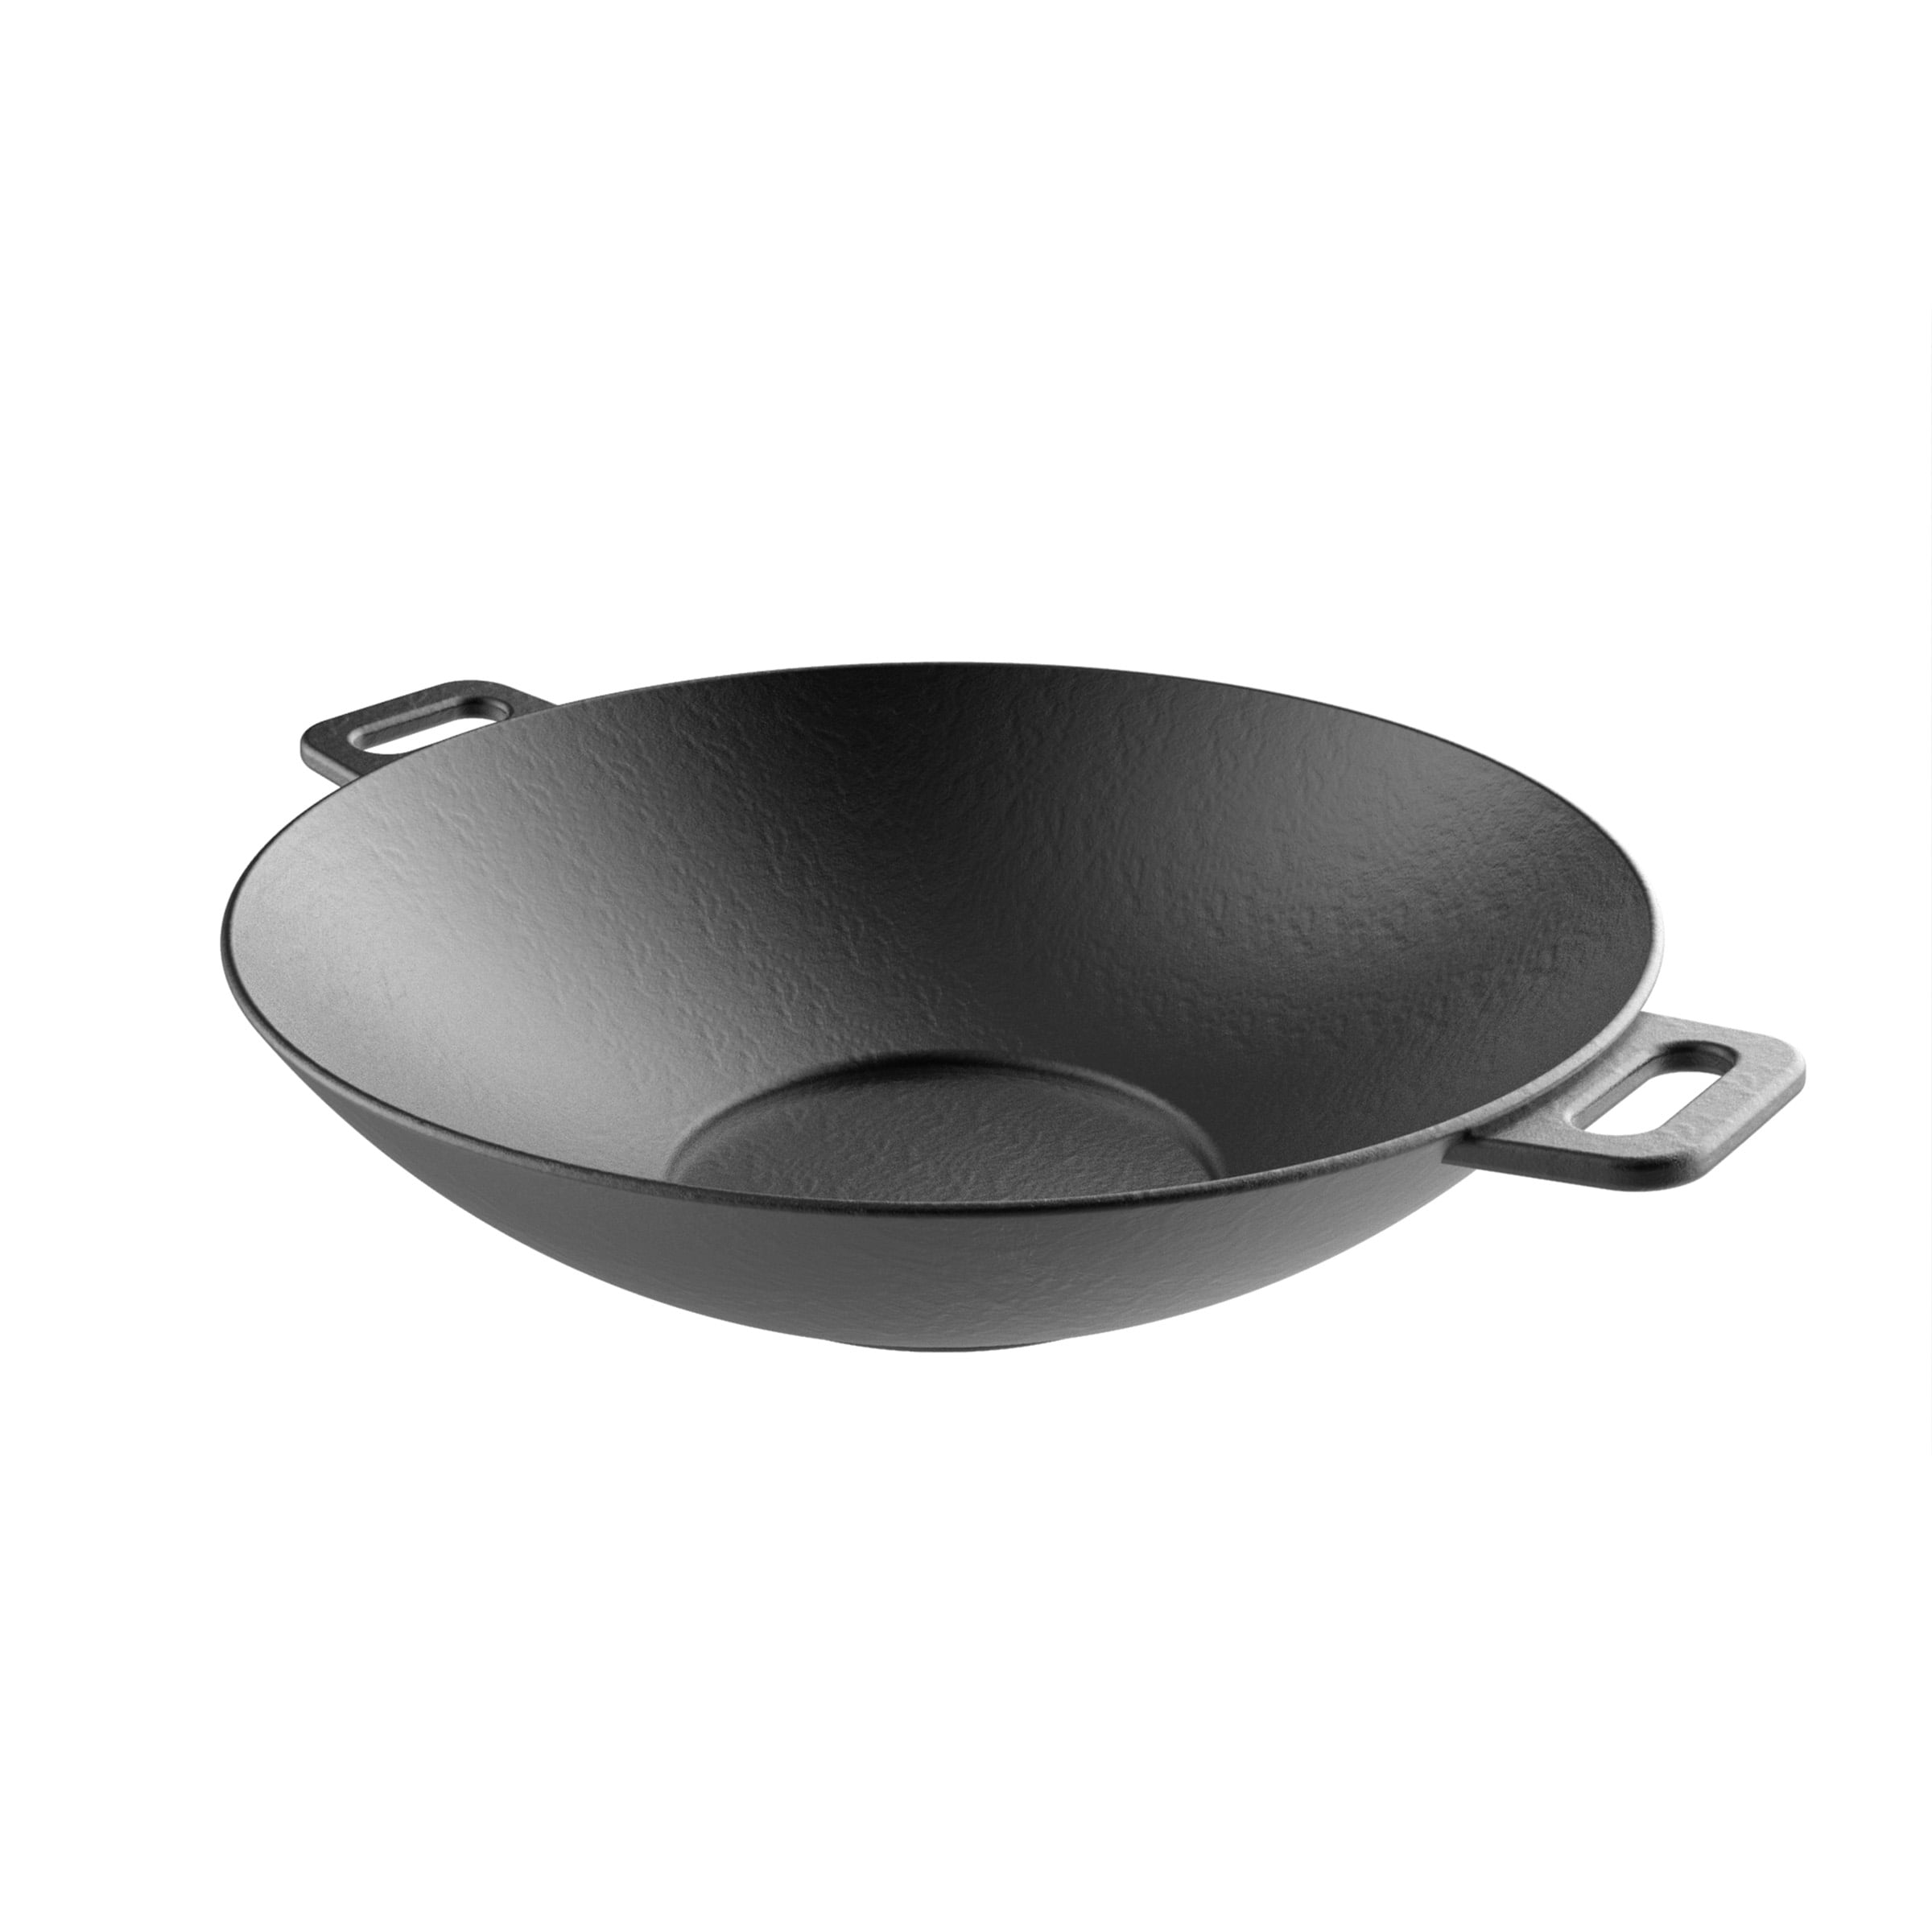 OUR TABLE 10.5 in. Pre-Seasoned Cast Iron Wok in Black 985119937M